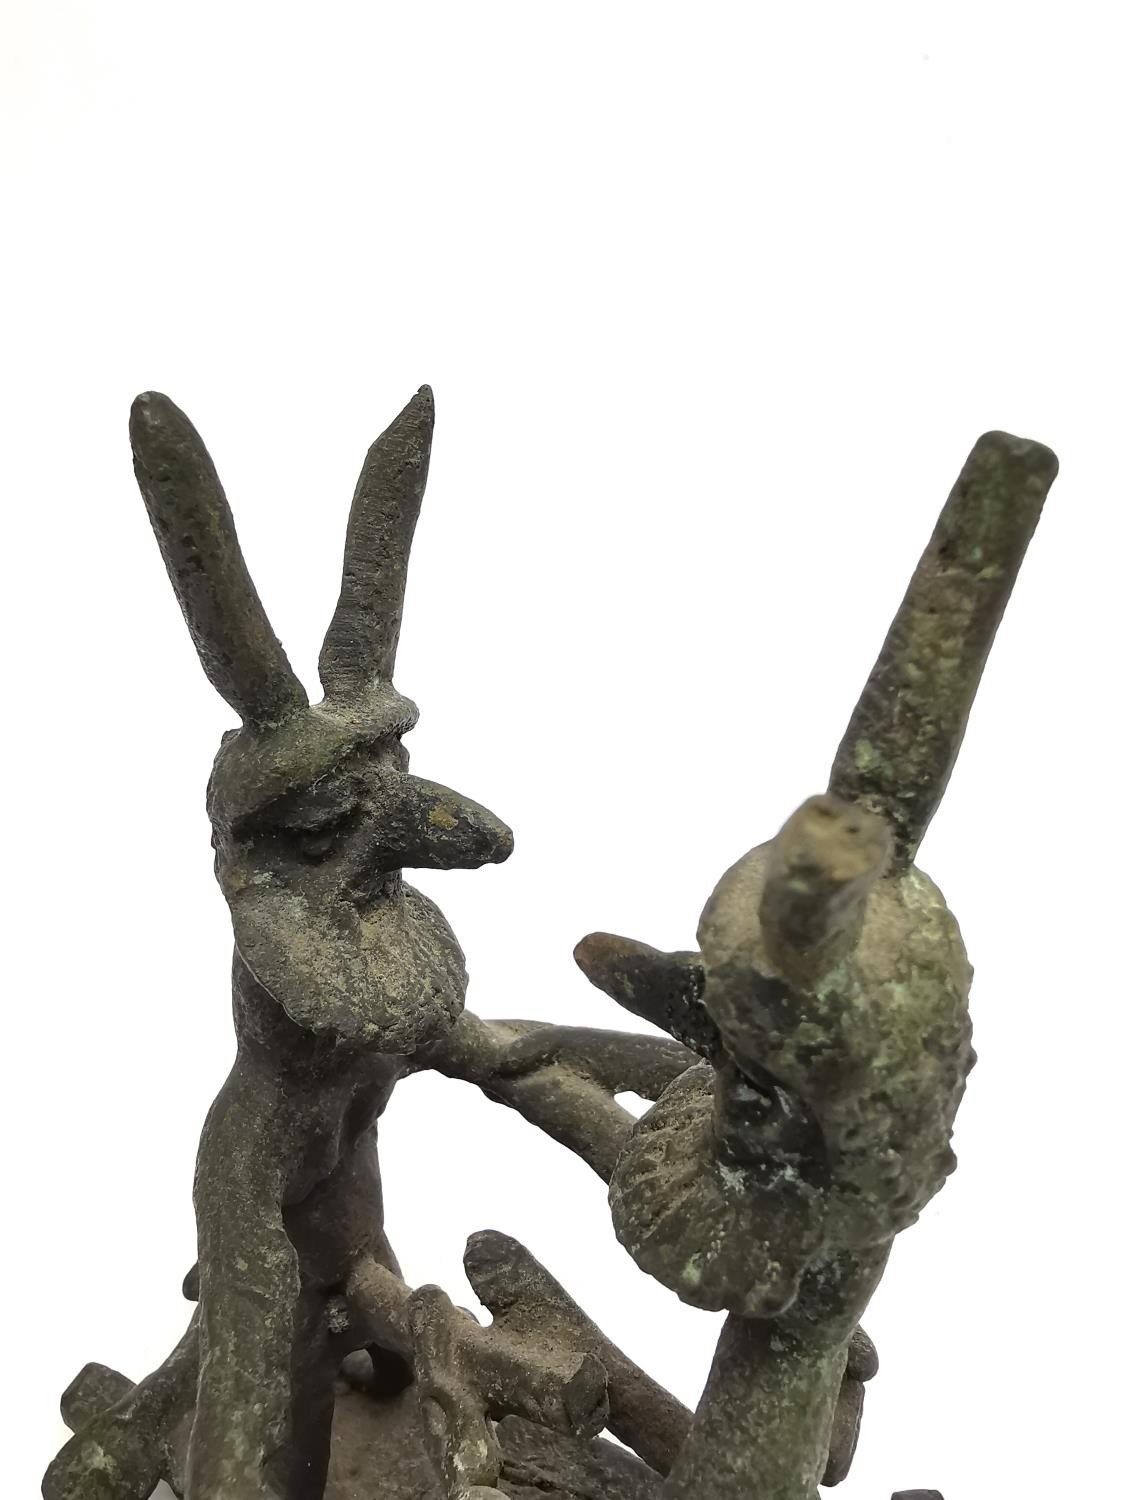 A Tribal bronze erotic sculpture of two bearded mythical creatures fighting. H.12 L.10.5 W.7cm. - Image 7 of 7